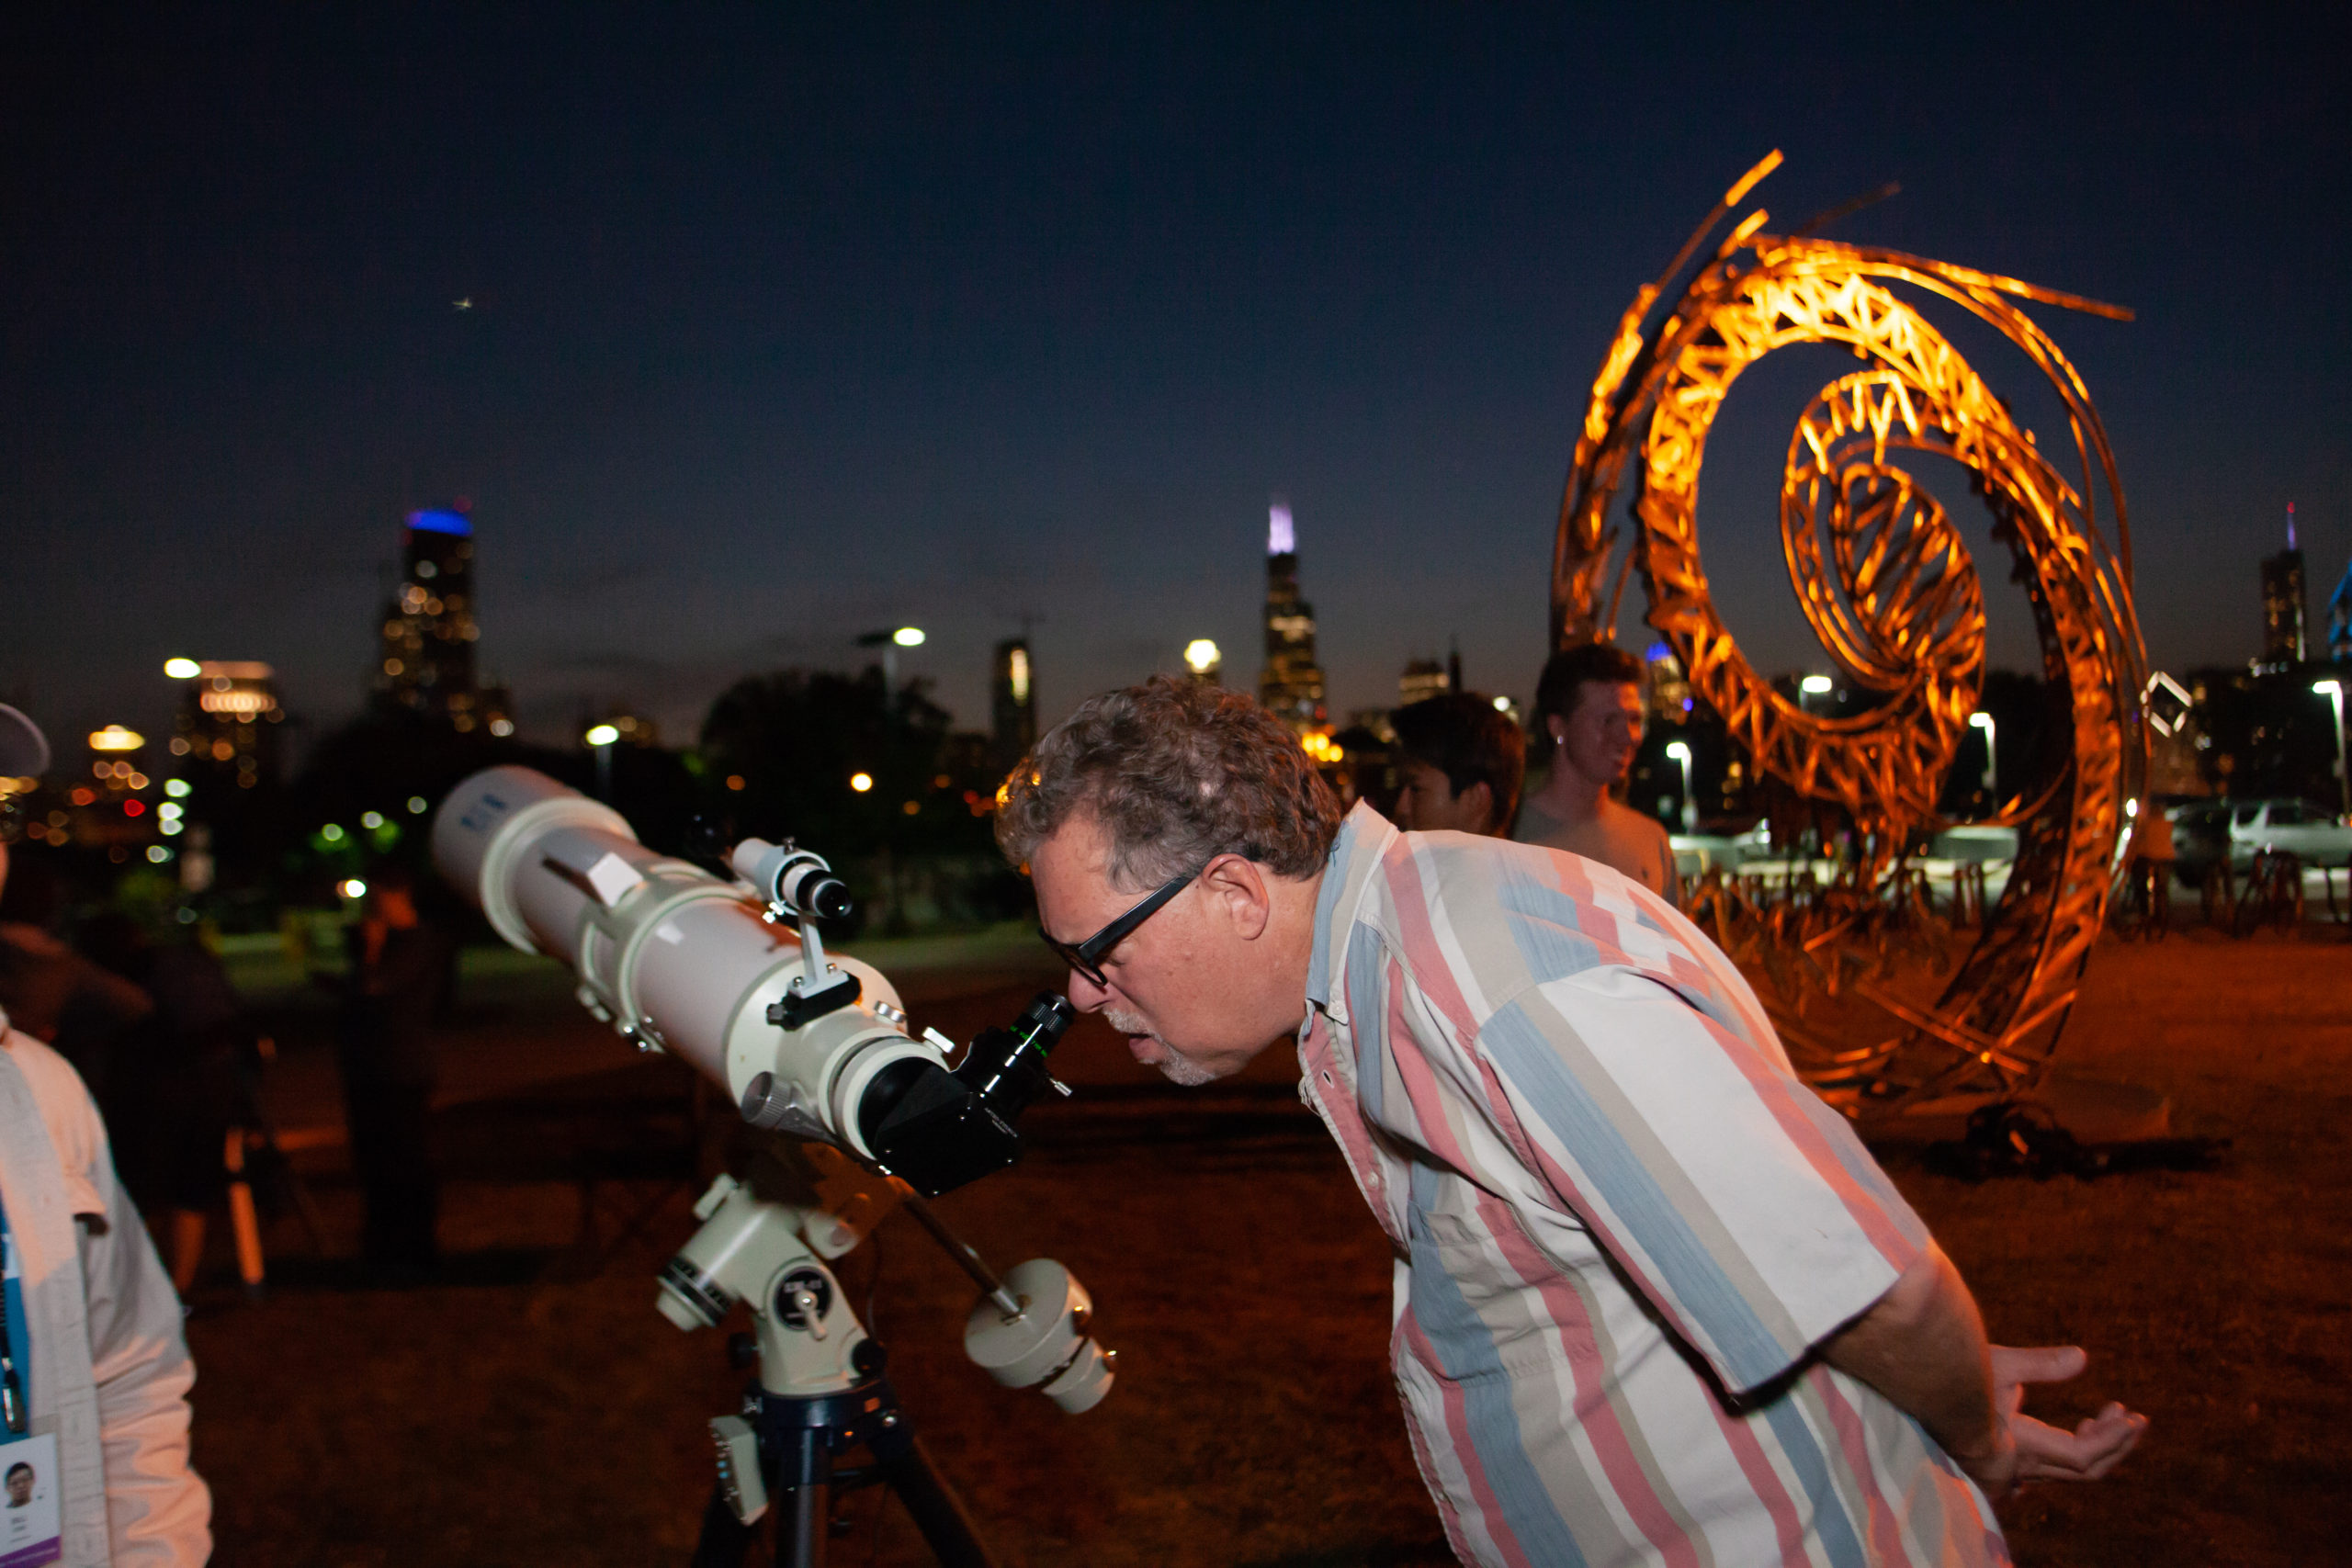 Individual looking through telescope in front of the Adler at night. Milky Way sculpture visible.